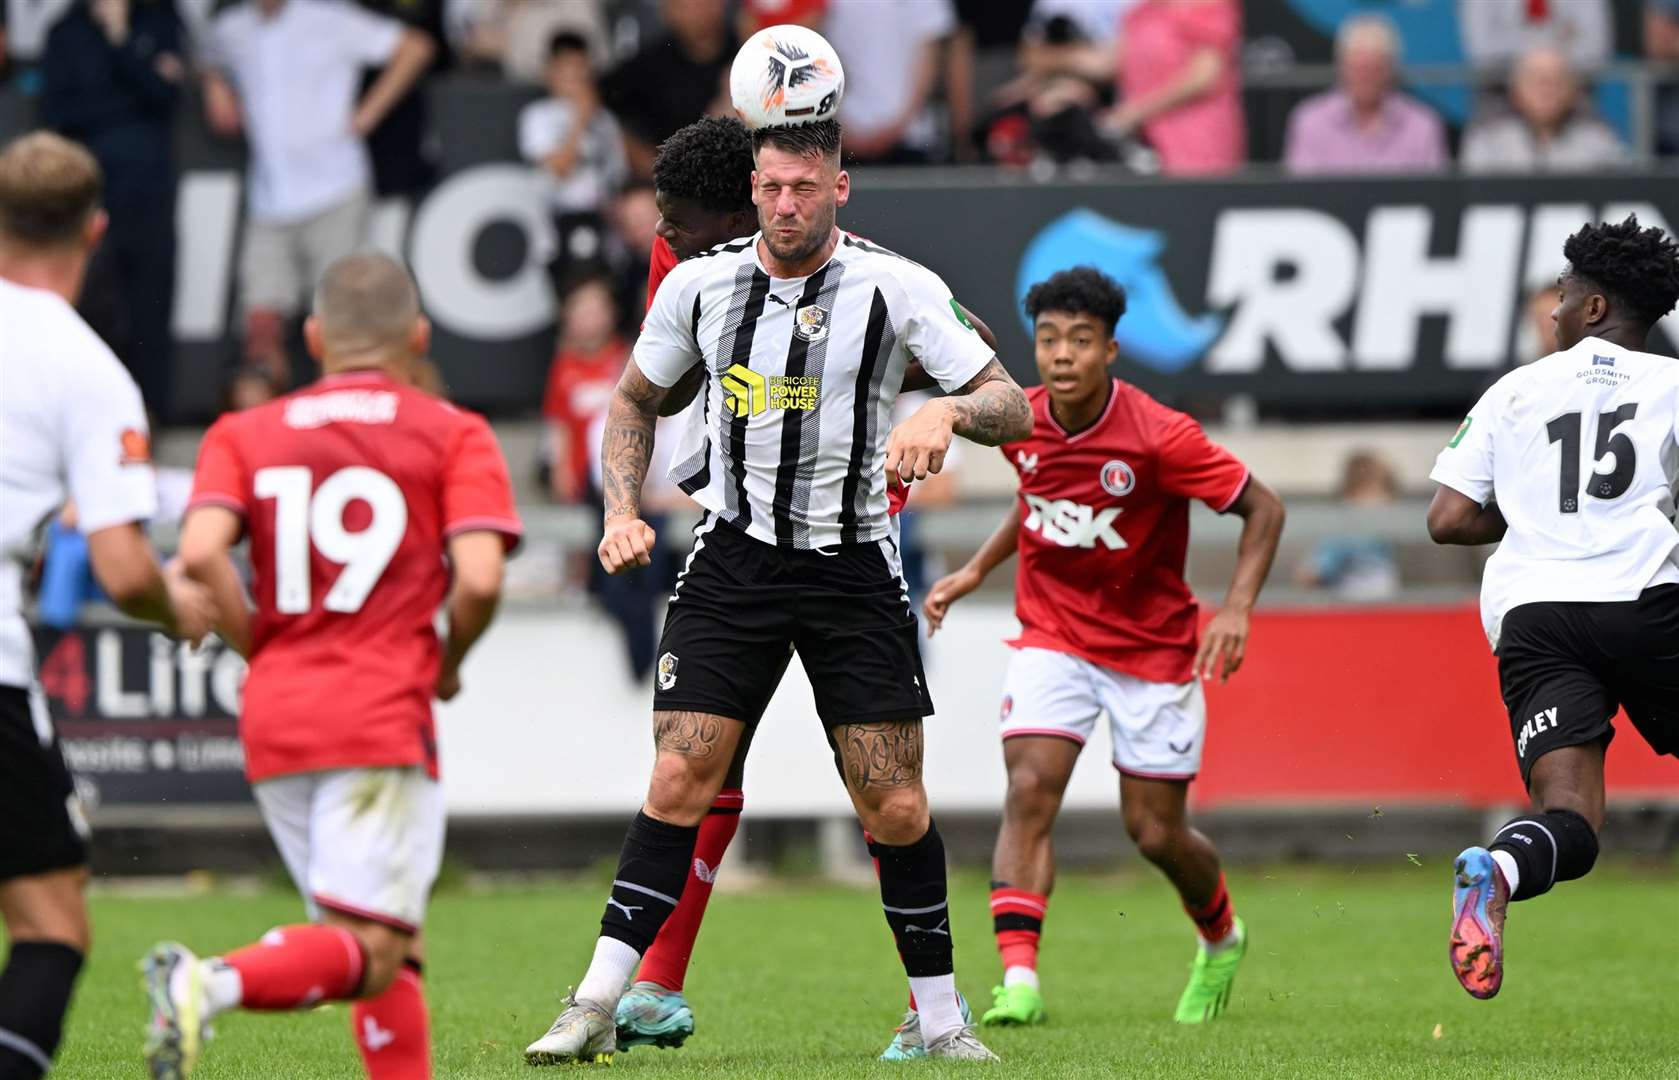 Striker Alex Wall helps the ball on for Dartford against Charlton. Picture: Keith Gillard